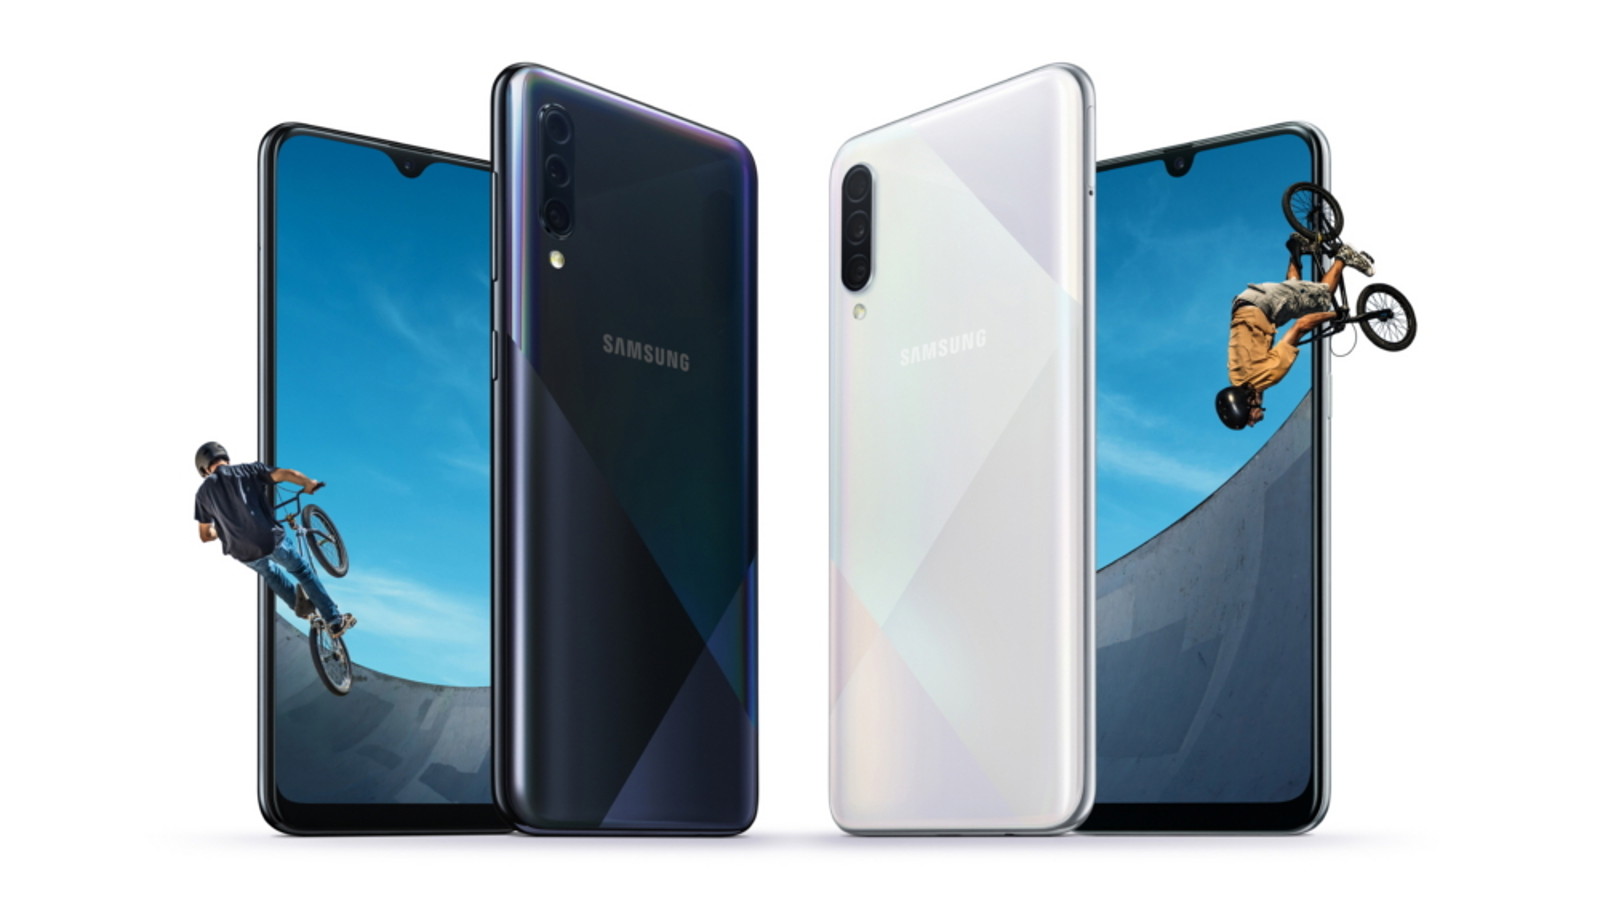 The Samsung Galaxy A50s and Galaxy A30s.